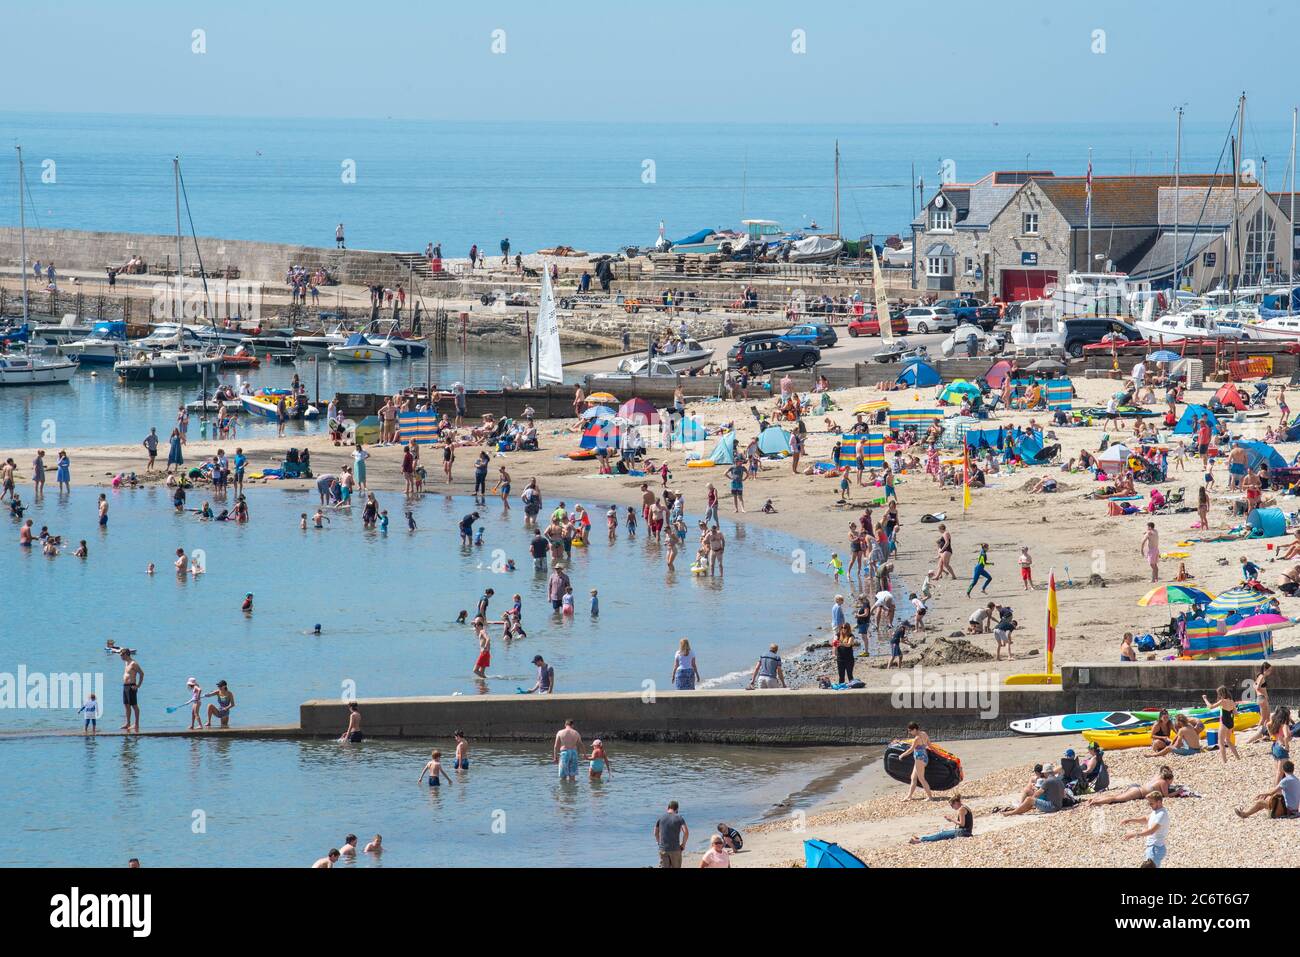 Lyme Regis, Dorset, UK. 12th July, 2020. UK Weather: Crowds of beachgoers flock to the picturesque seaside resort of Lyme Regis to soak up the scorching hot sunshine. Families, visitors and sunseekers packed out the beach this weekend to enjoy the best of the sunny weather as tourists make a wlecome return to the popular resort. Credit: Celia McMahon/Alamy Live News Stock Photo